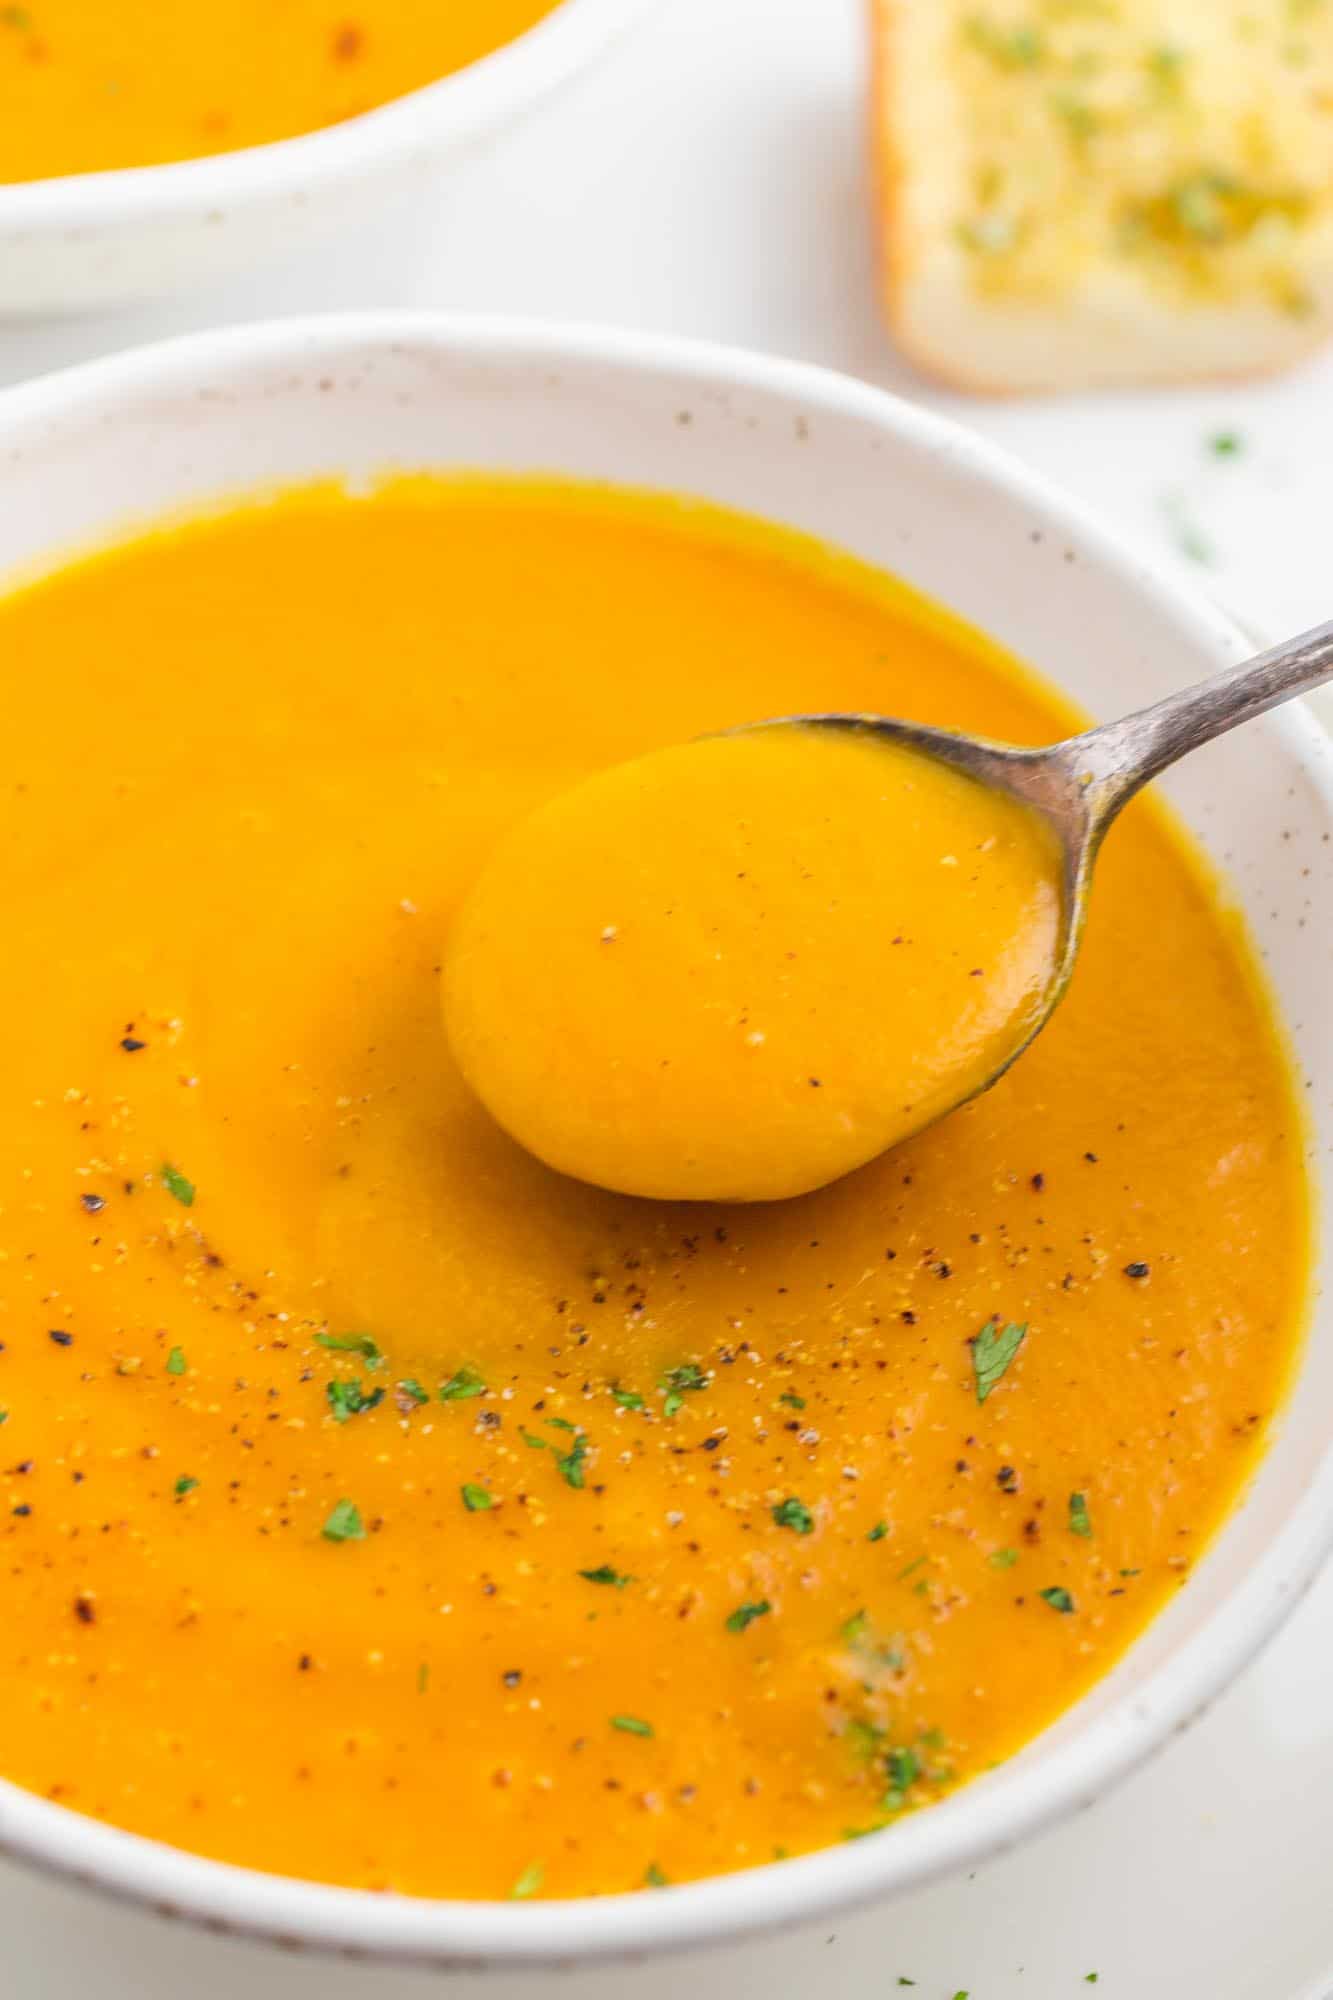 Taking a spoonful of smooth and creamy sweet potato soup, a close up shot